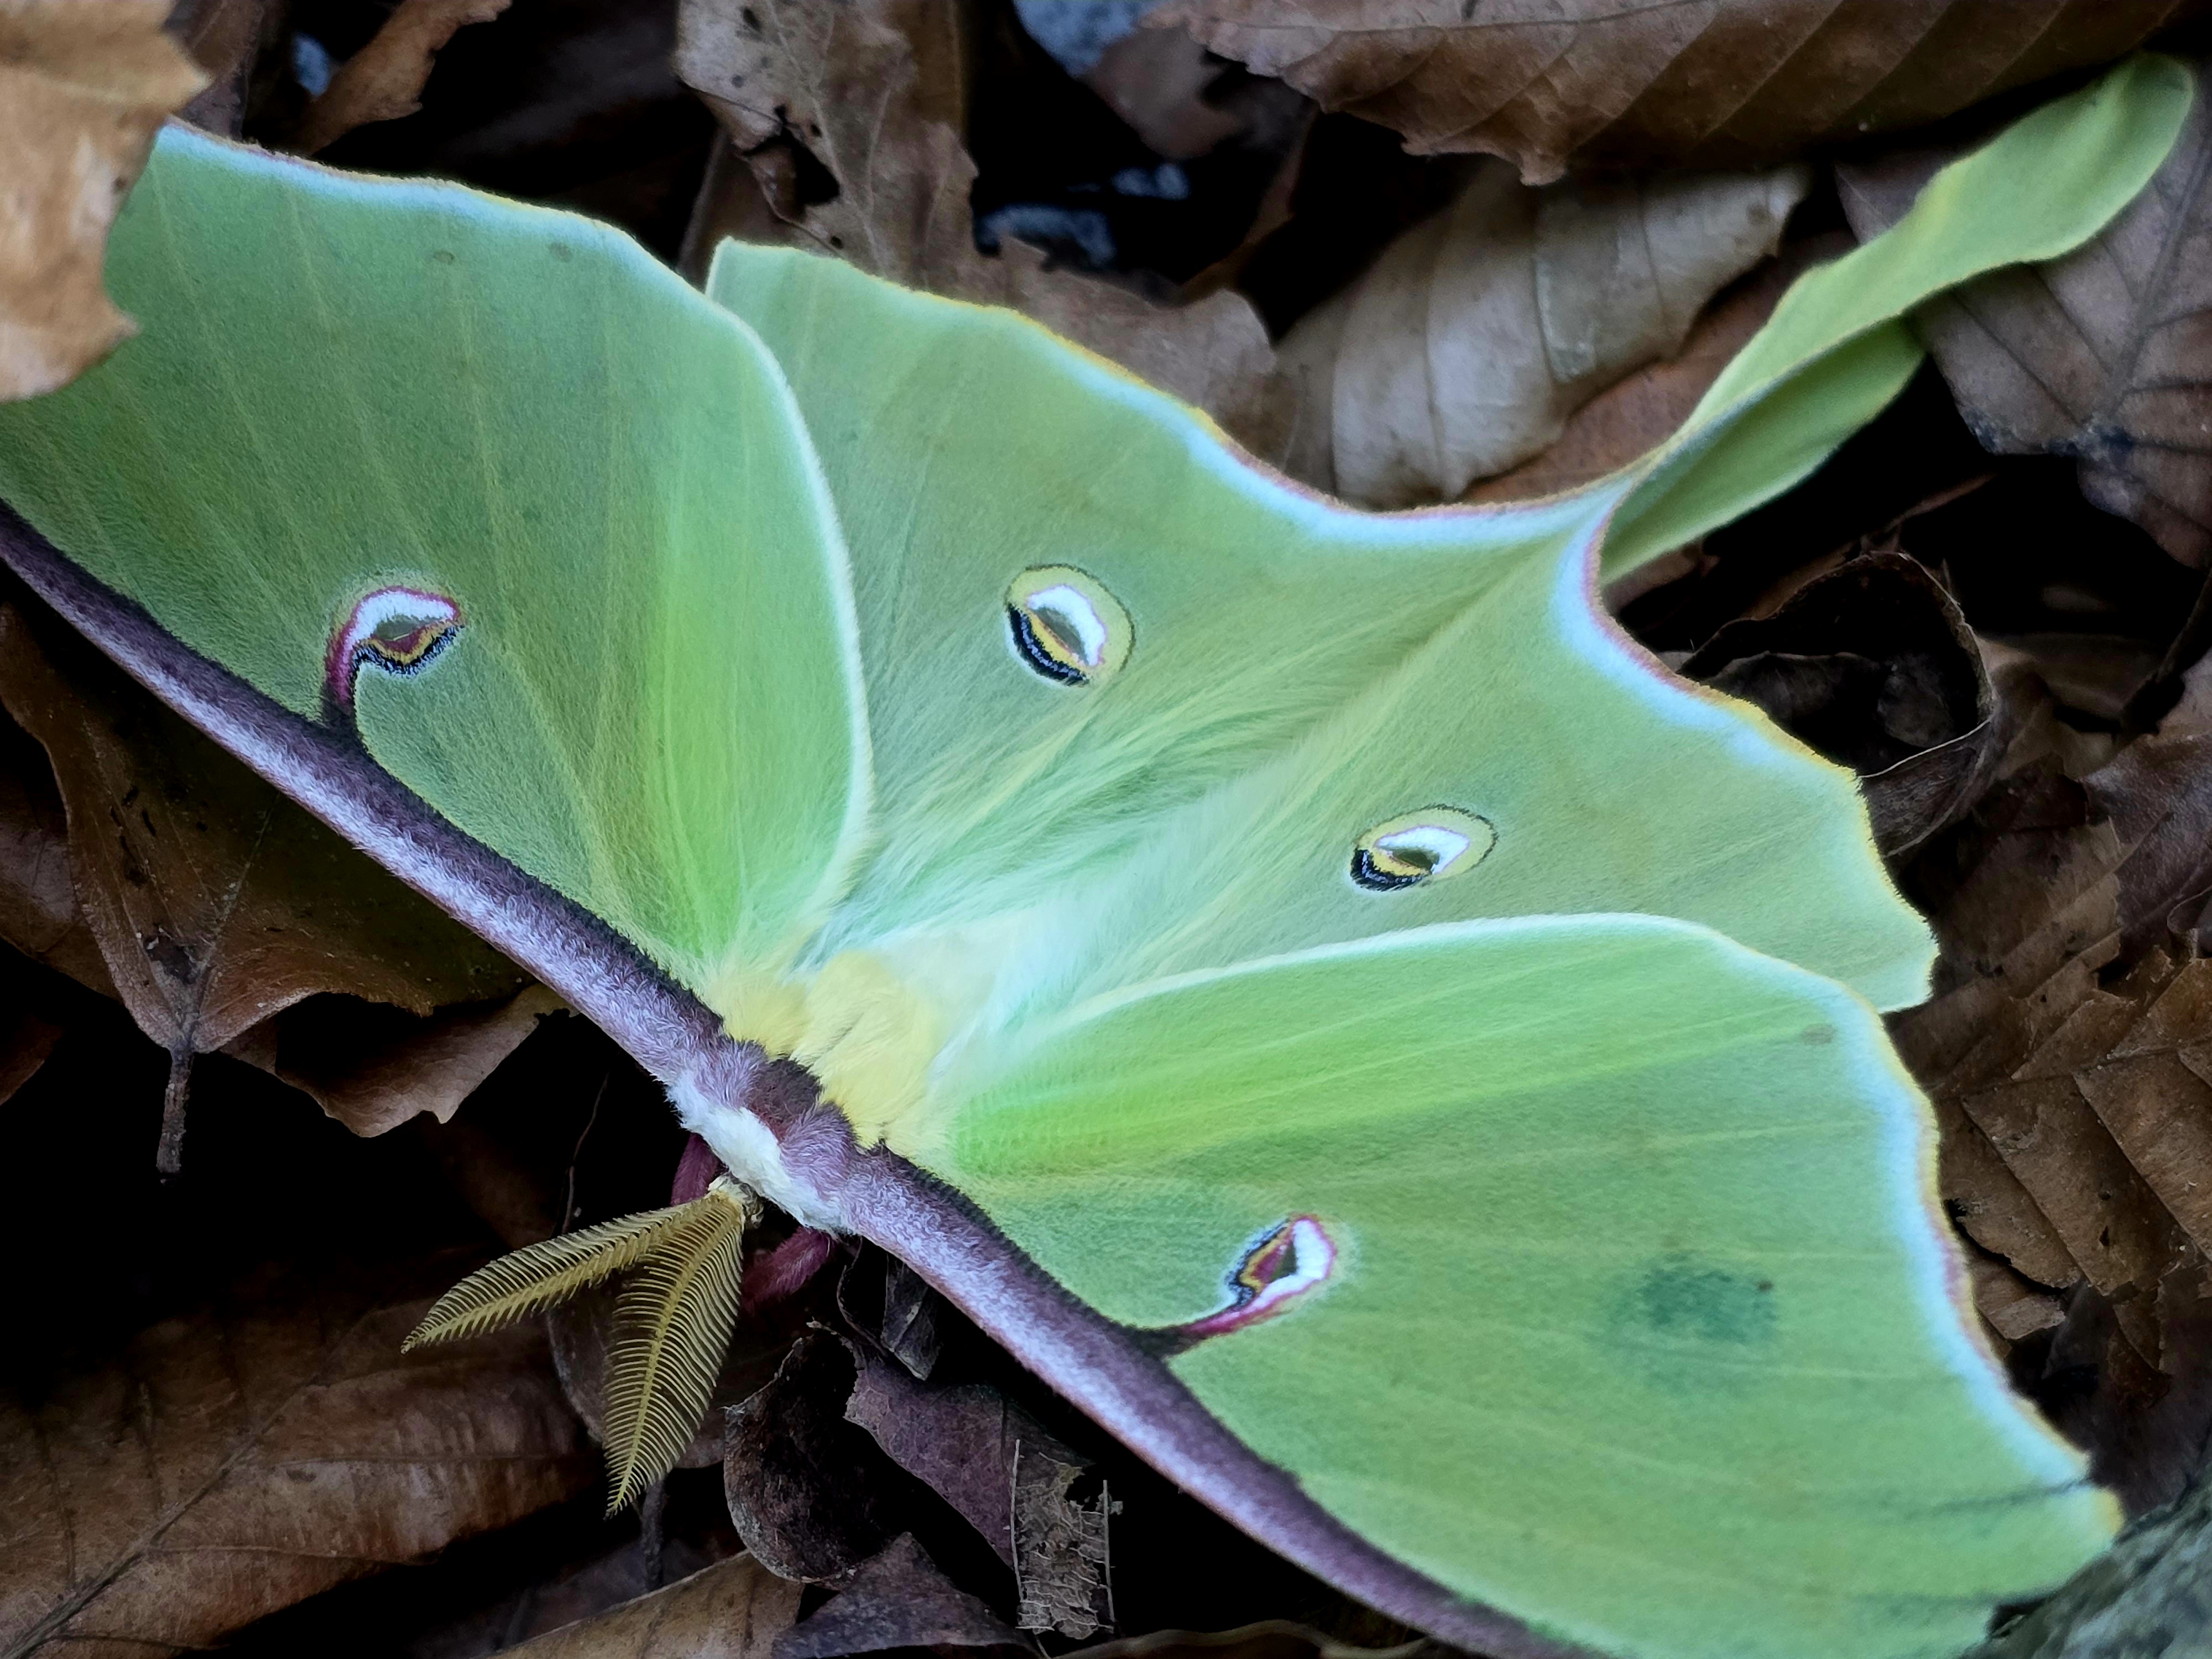 A close up photo of a beautiful luna moth which has green wings with speckled white and red spots.